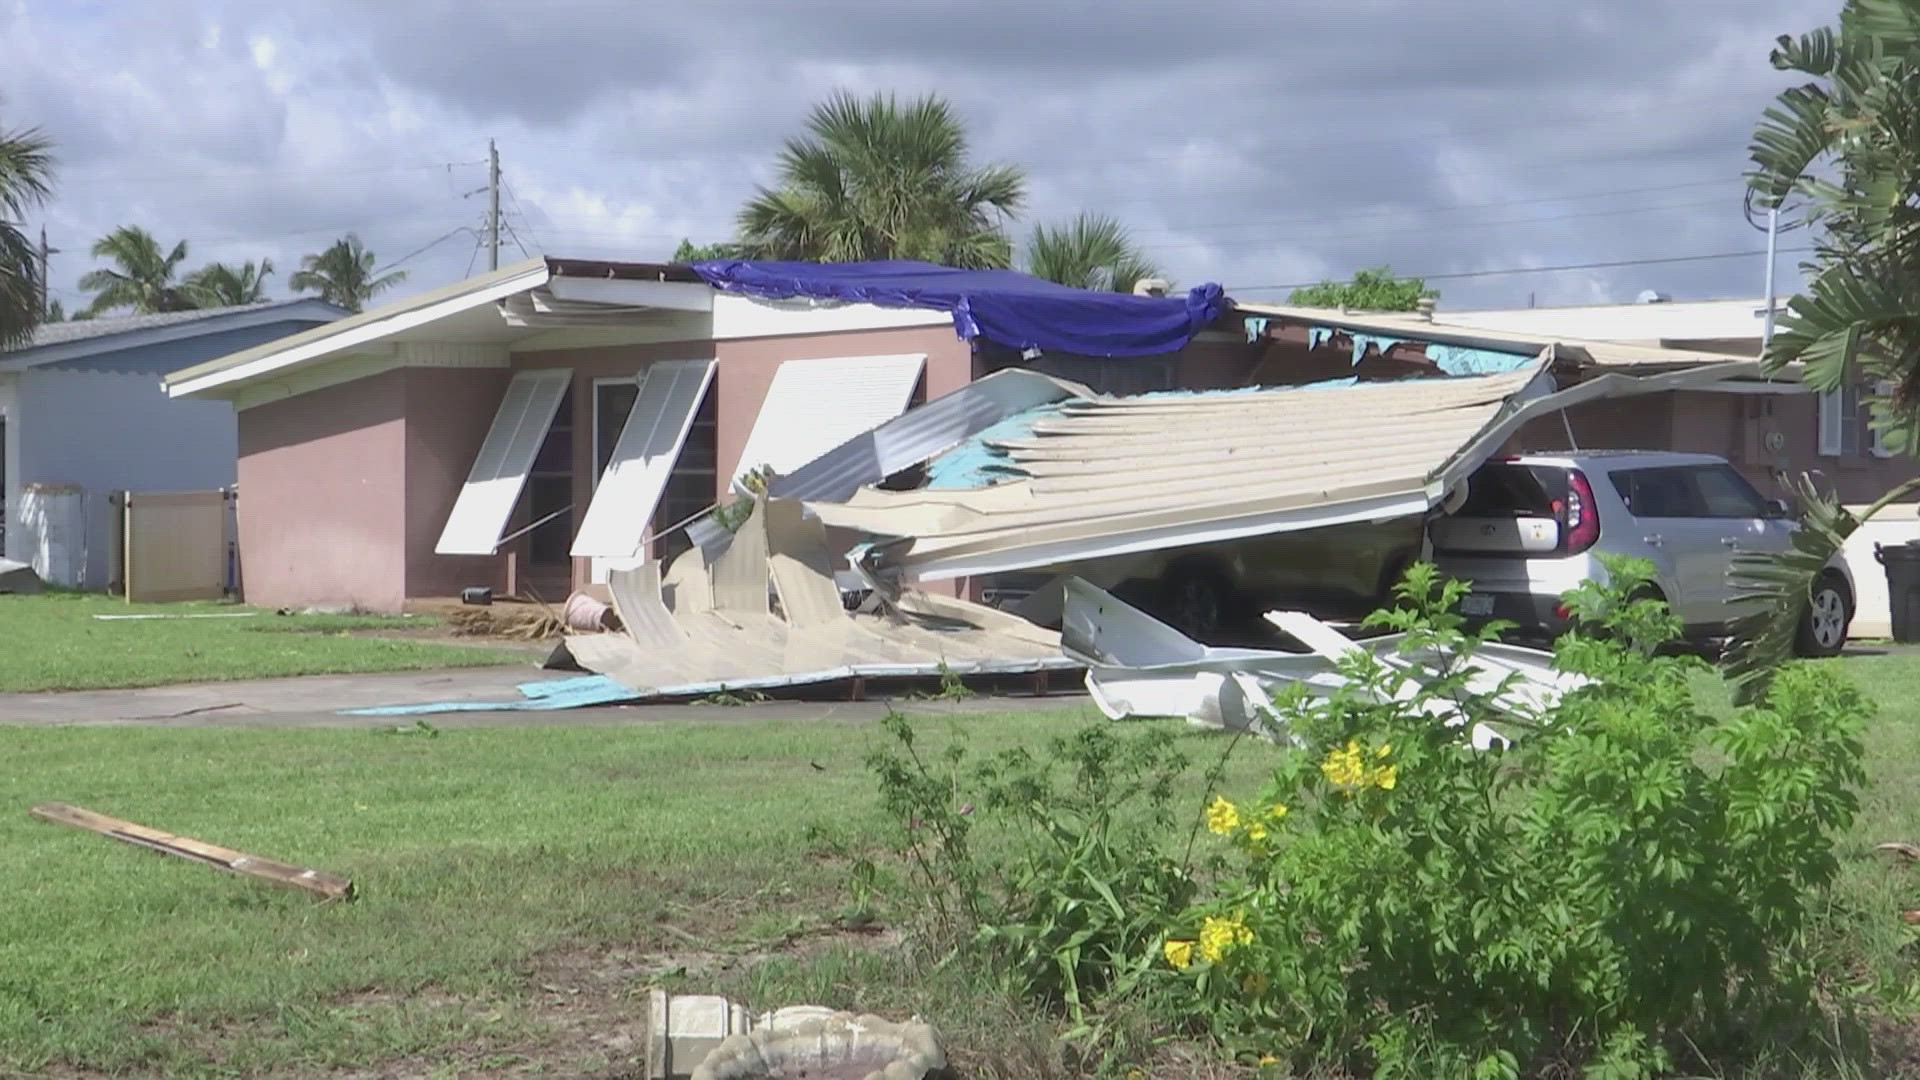 The National Weather Service was on the ground in Satellite Beach Thursday to verify that a tornado touched down in the South Patrick Park neighborhood.